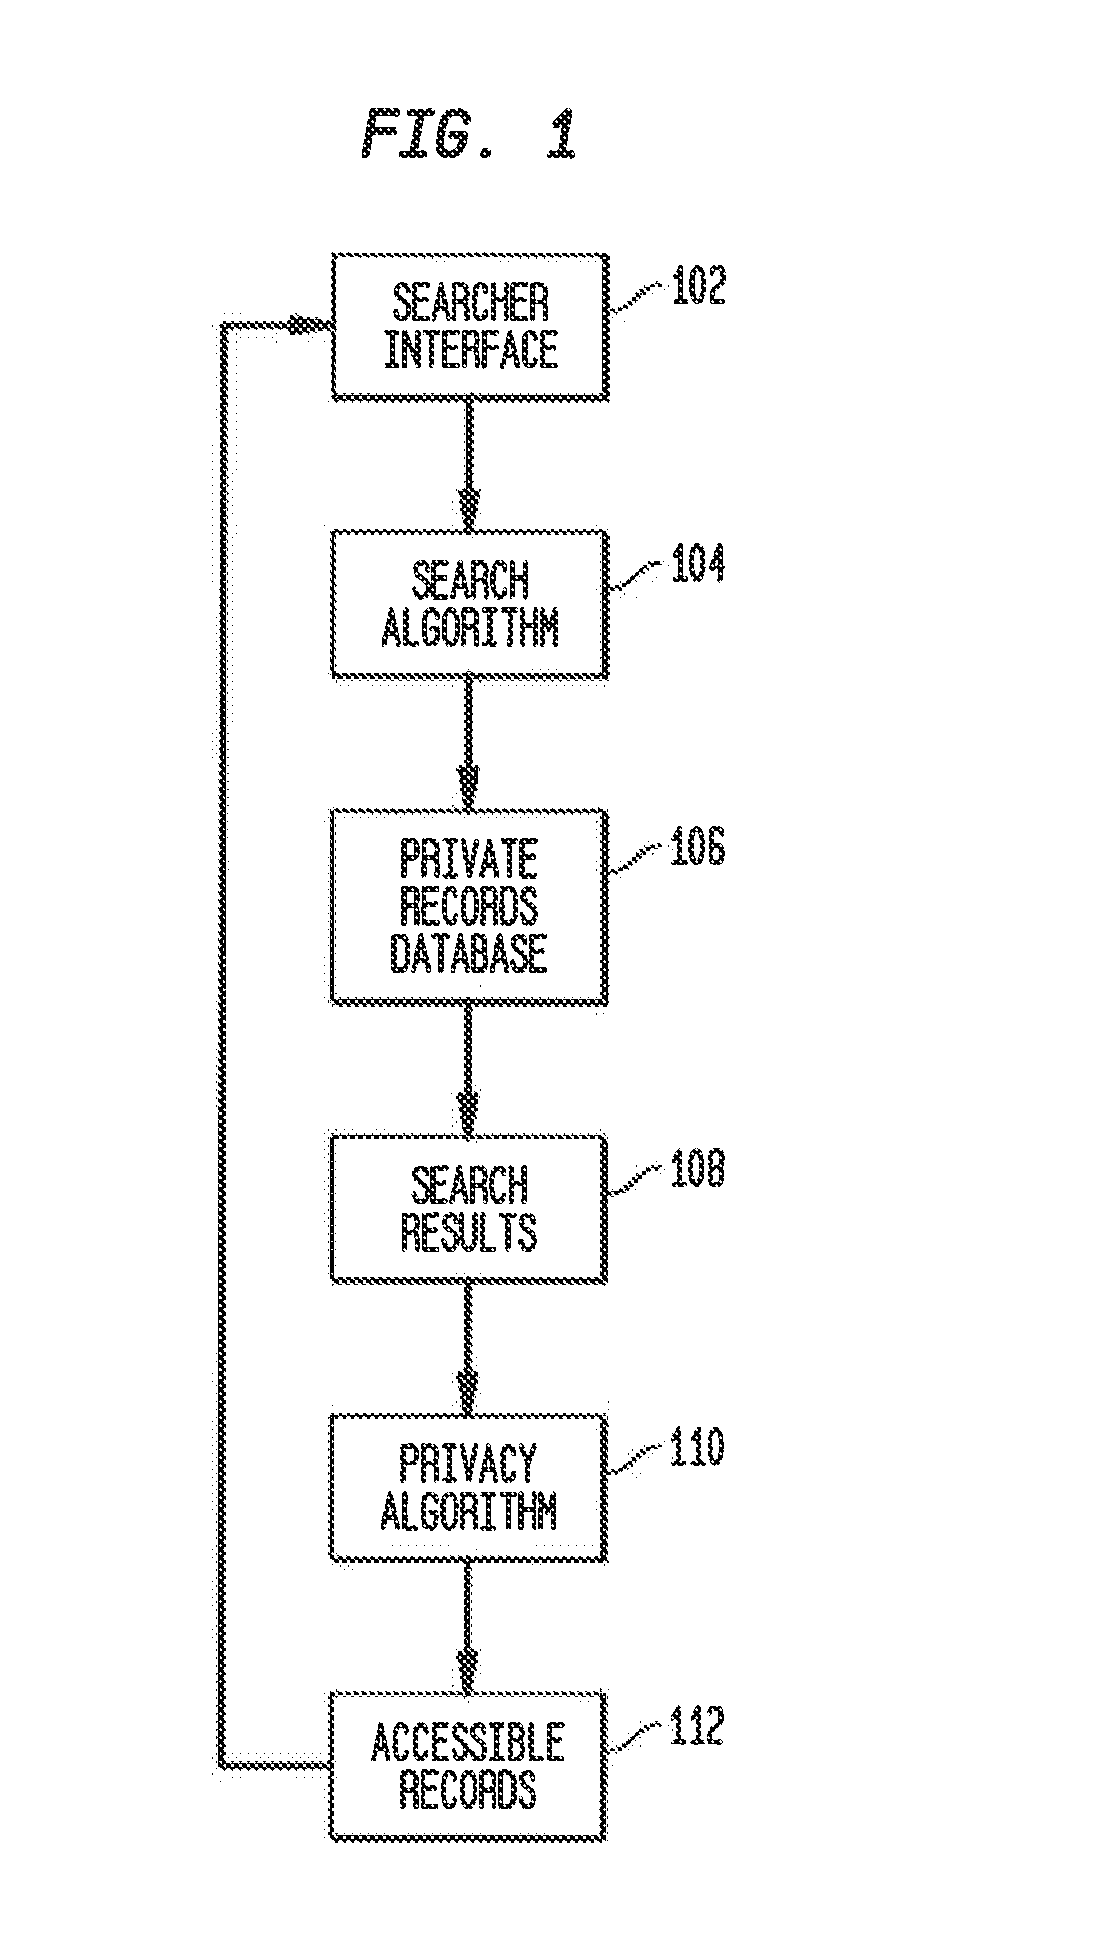 System and method for recruiting subjects for research studies and clinical trials over the internet